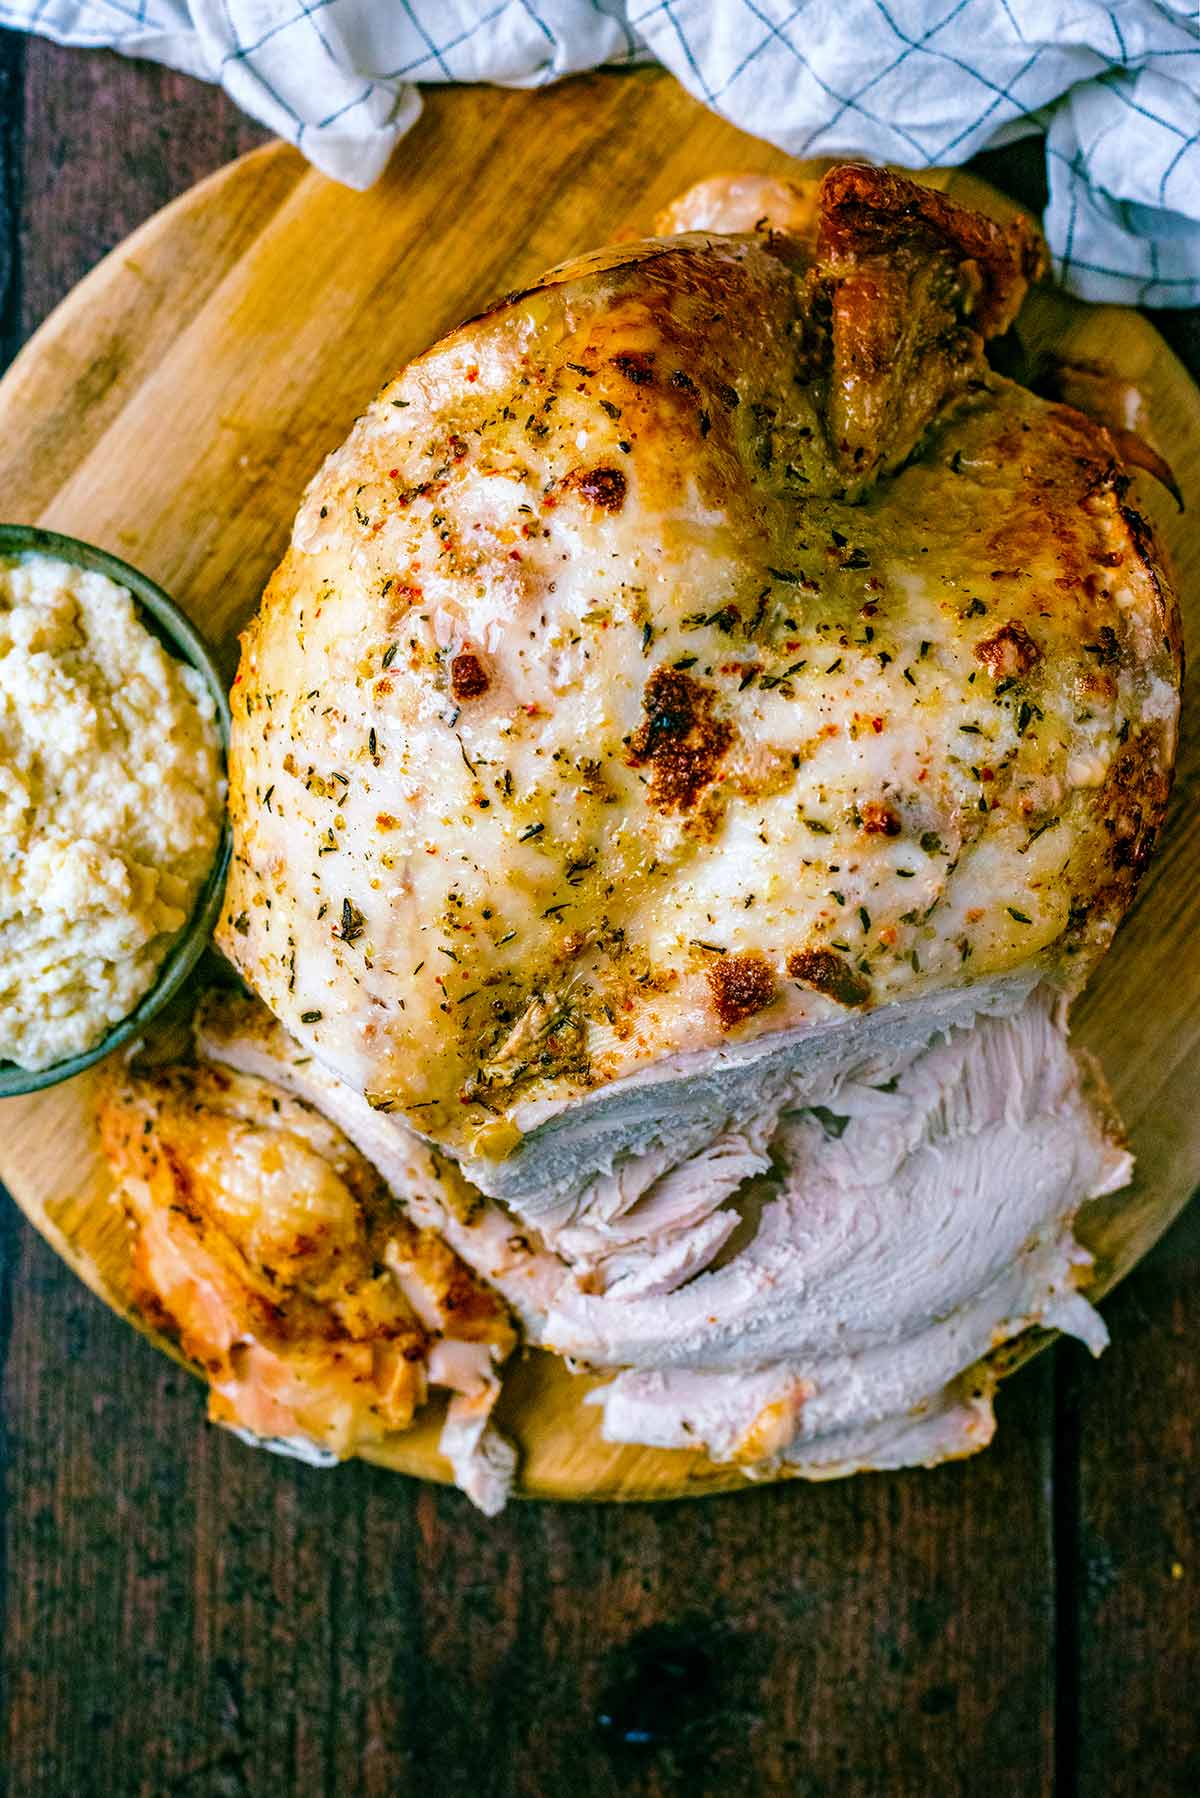 A cooked turkey crown on a board with a small bowl of bread sauce.